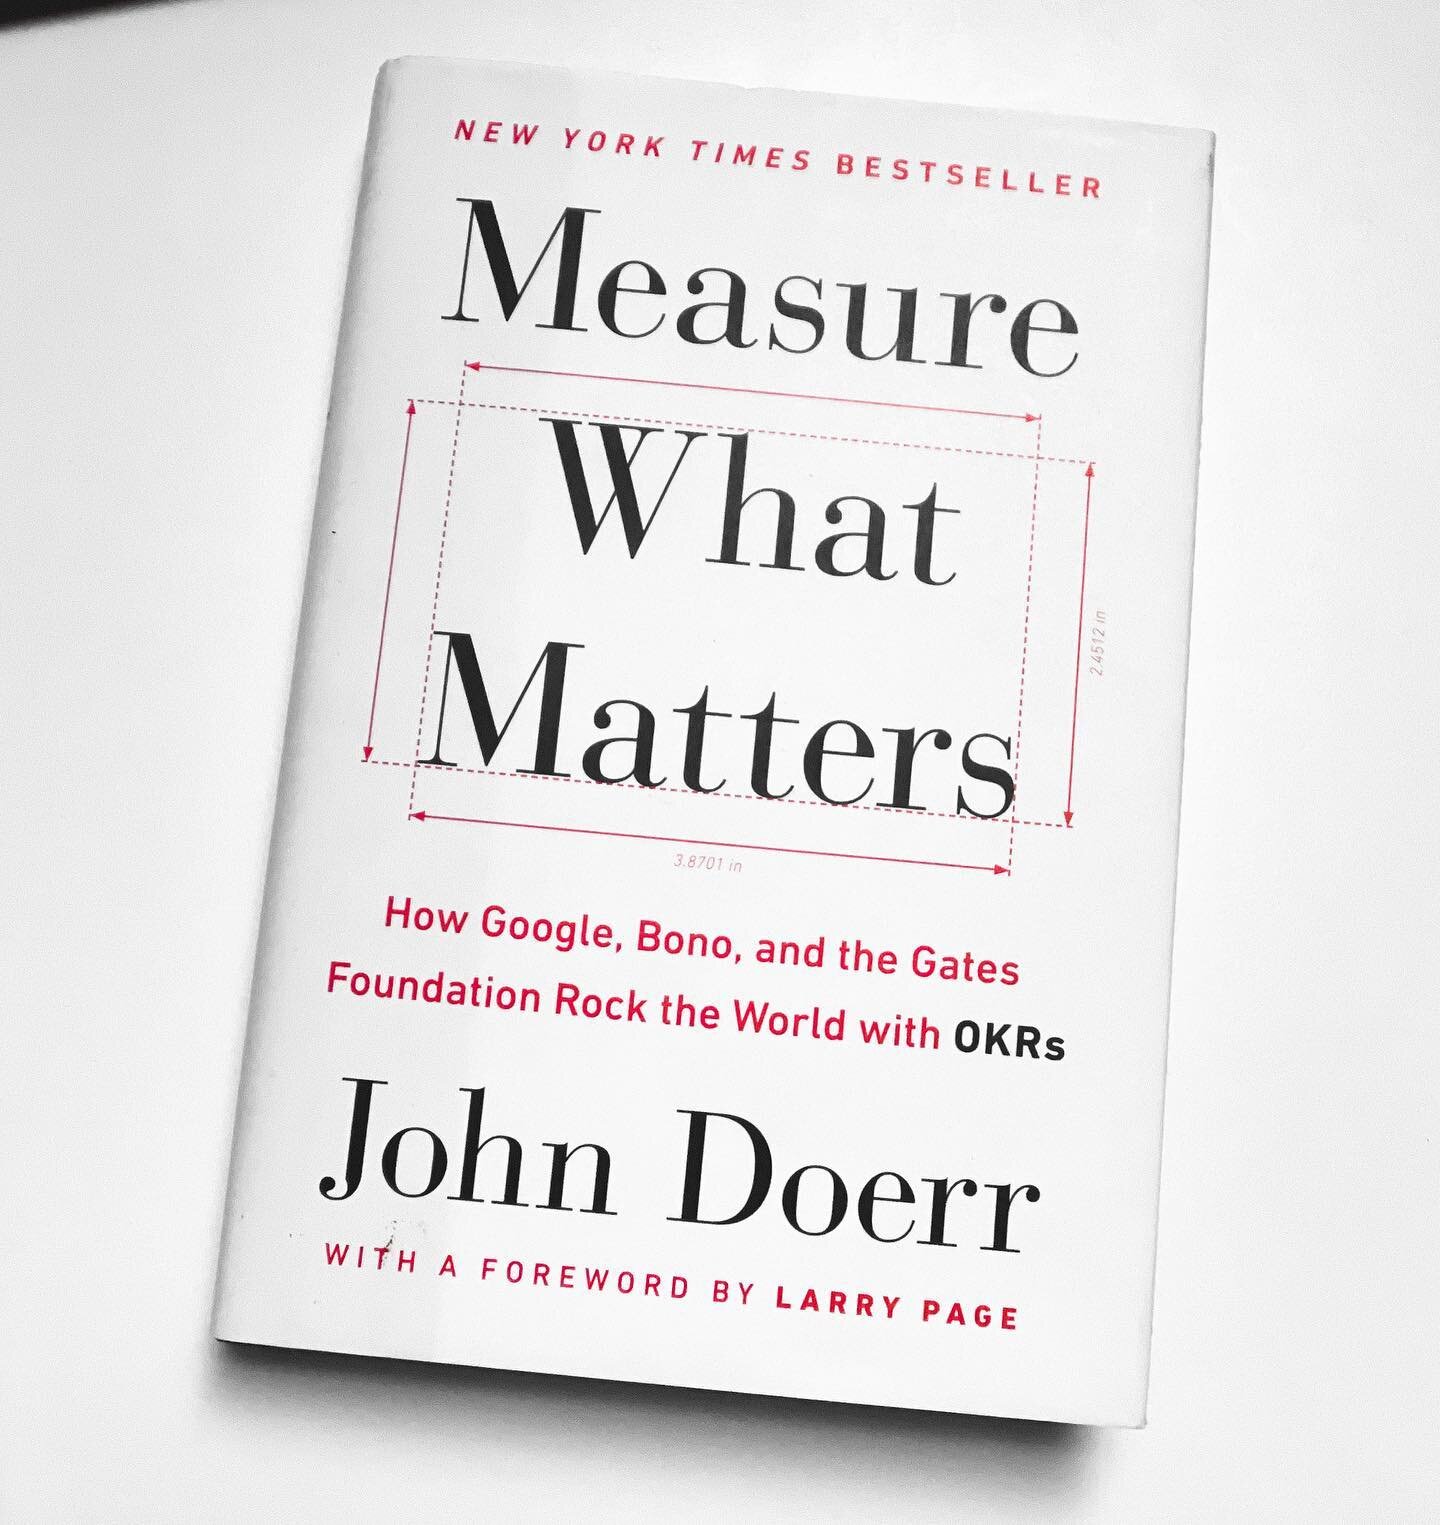 Today&rsquo;s book recommendation is from the famous John Doerr, Measure What Matters. This book contains valuable advice about the power of OKR&rsquo;s (Objectives and Key Results) as a mechanism to help get everyone in a company moving in the same 